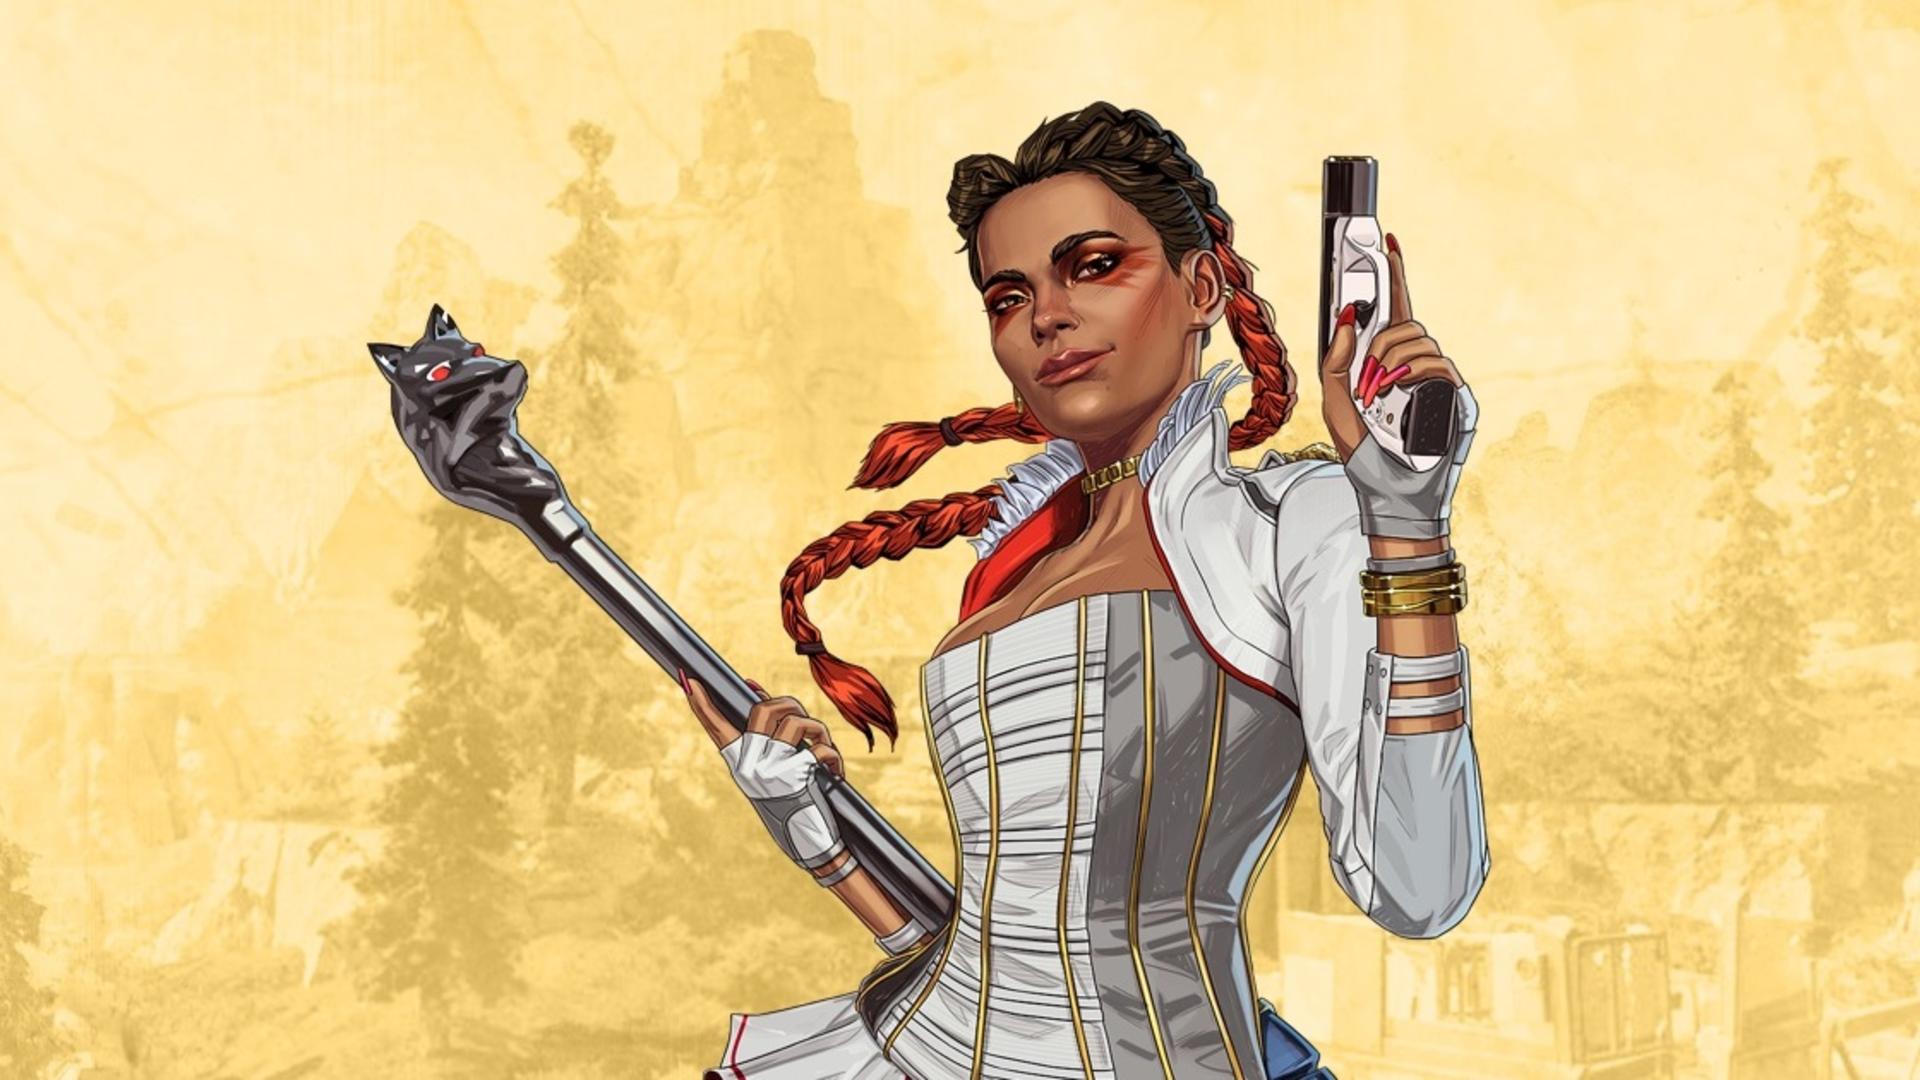 Loba is coming to Apex Legends with Season 5 this month. Rock